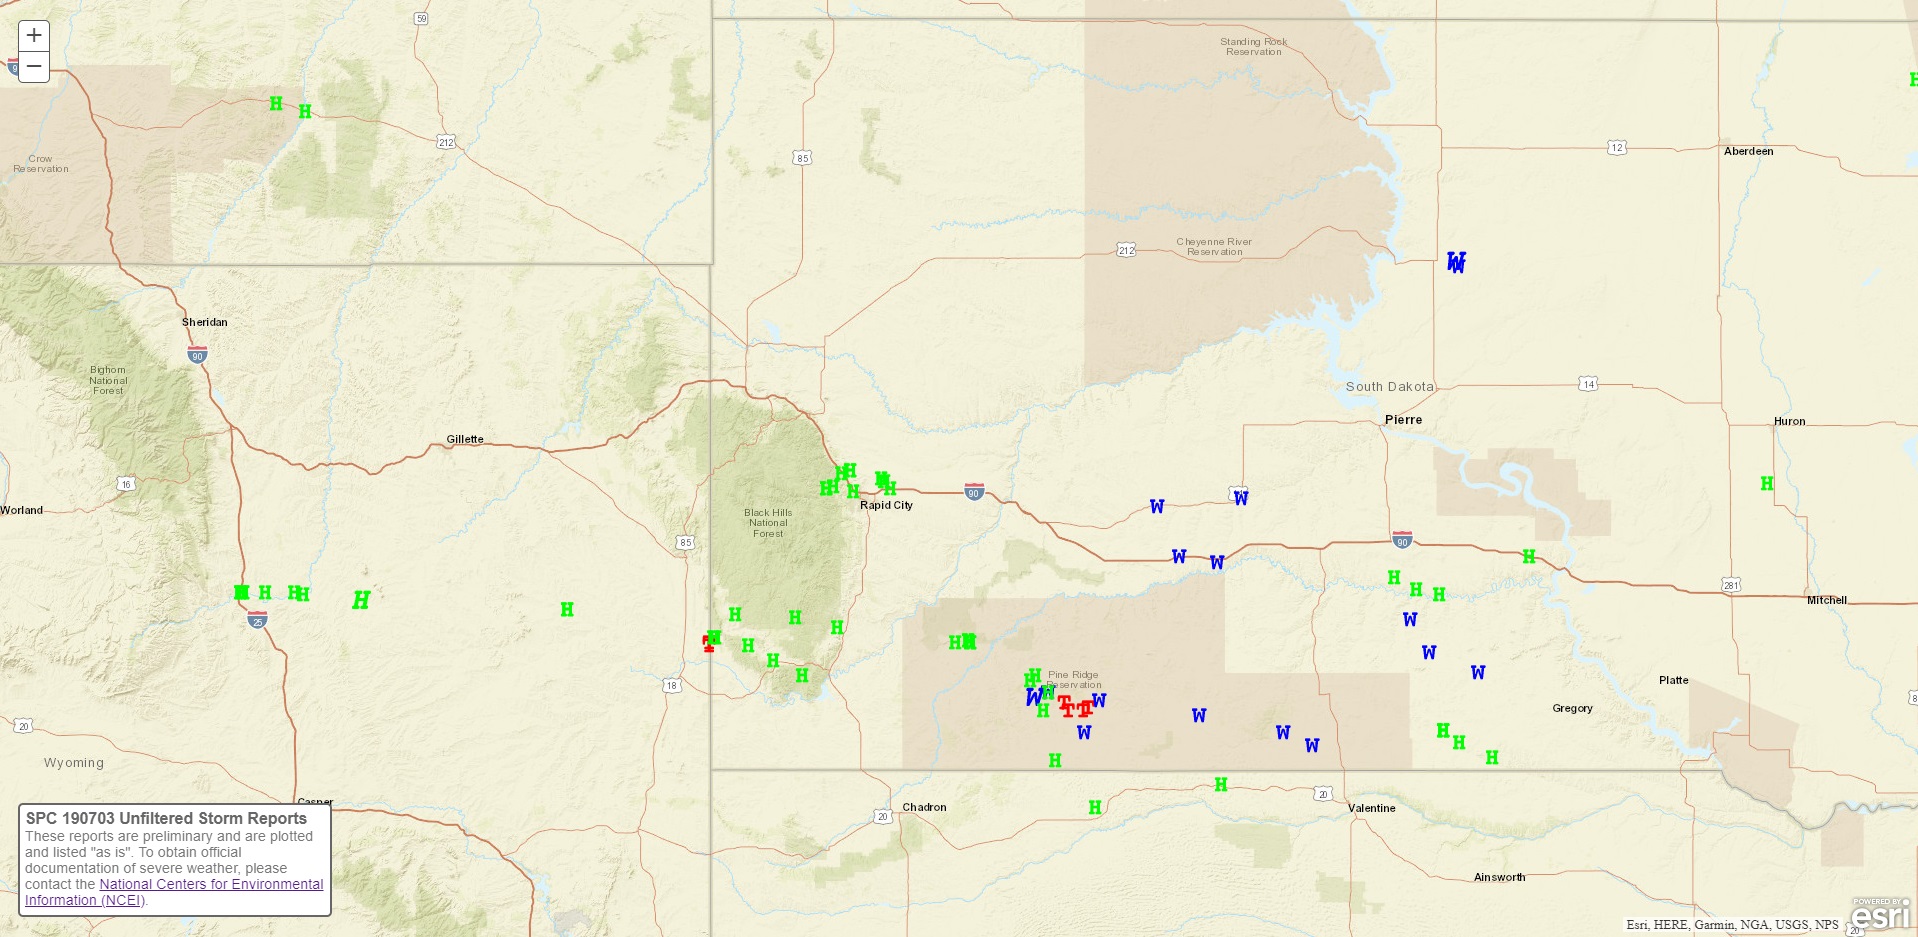 Preliminary storm reports for July 3, 2019